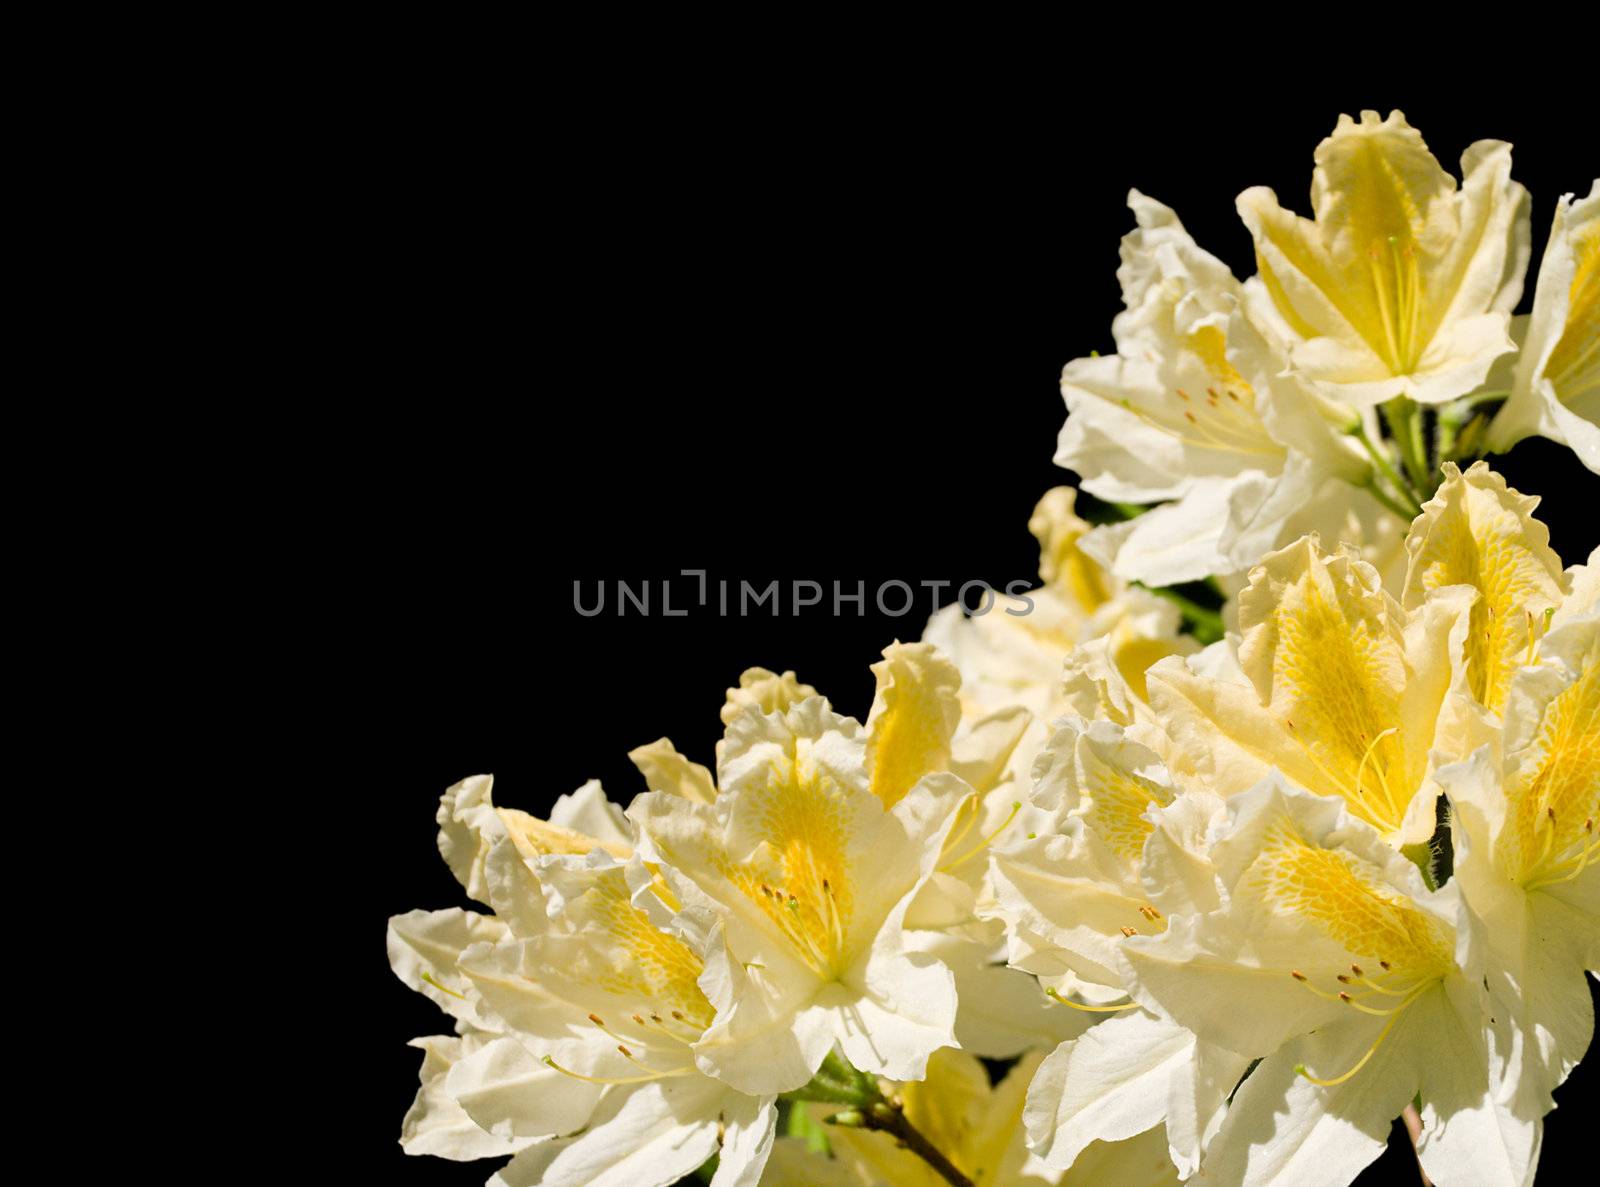 flowers of rhododendron, isolated on black